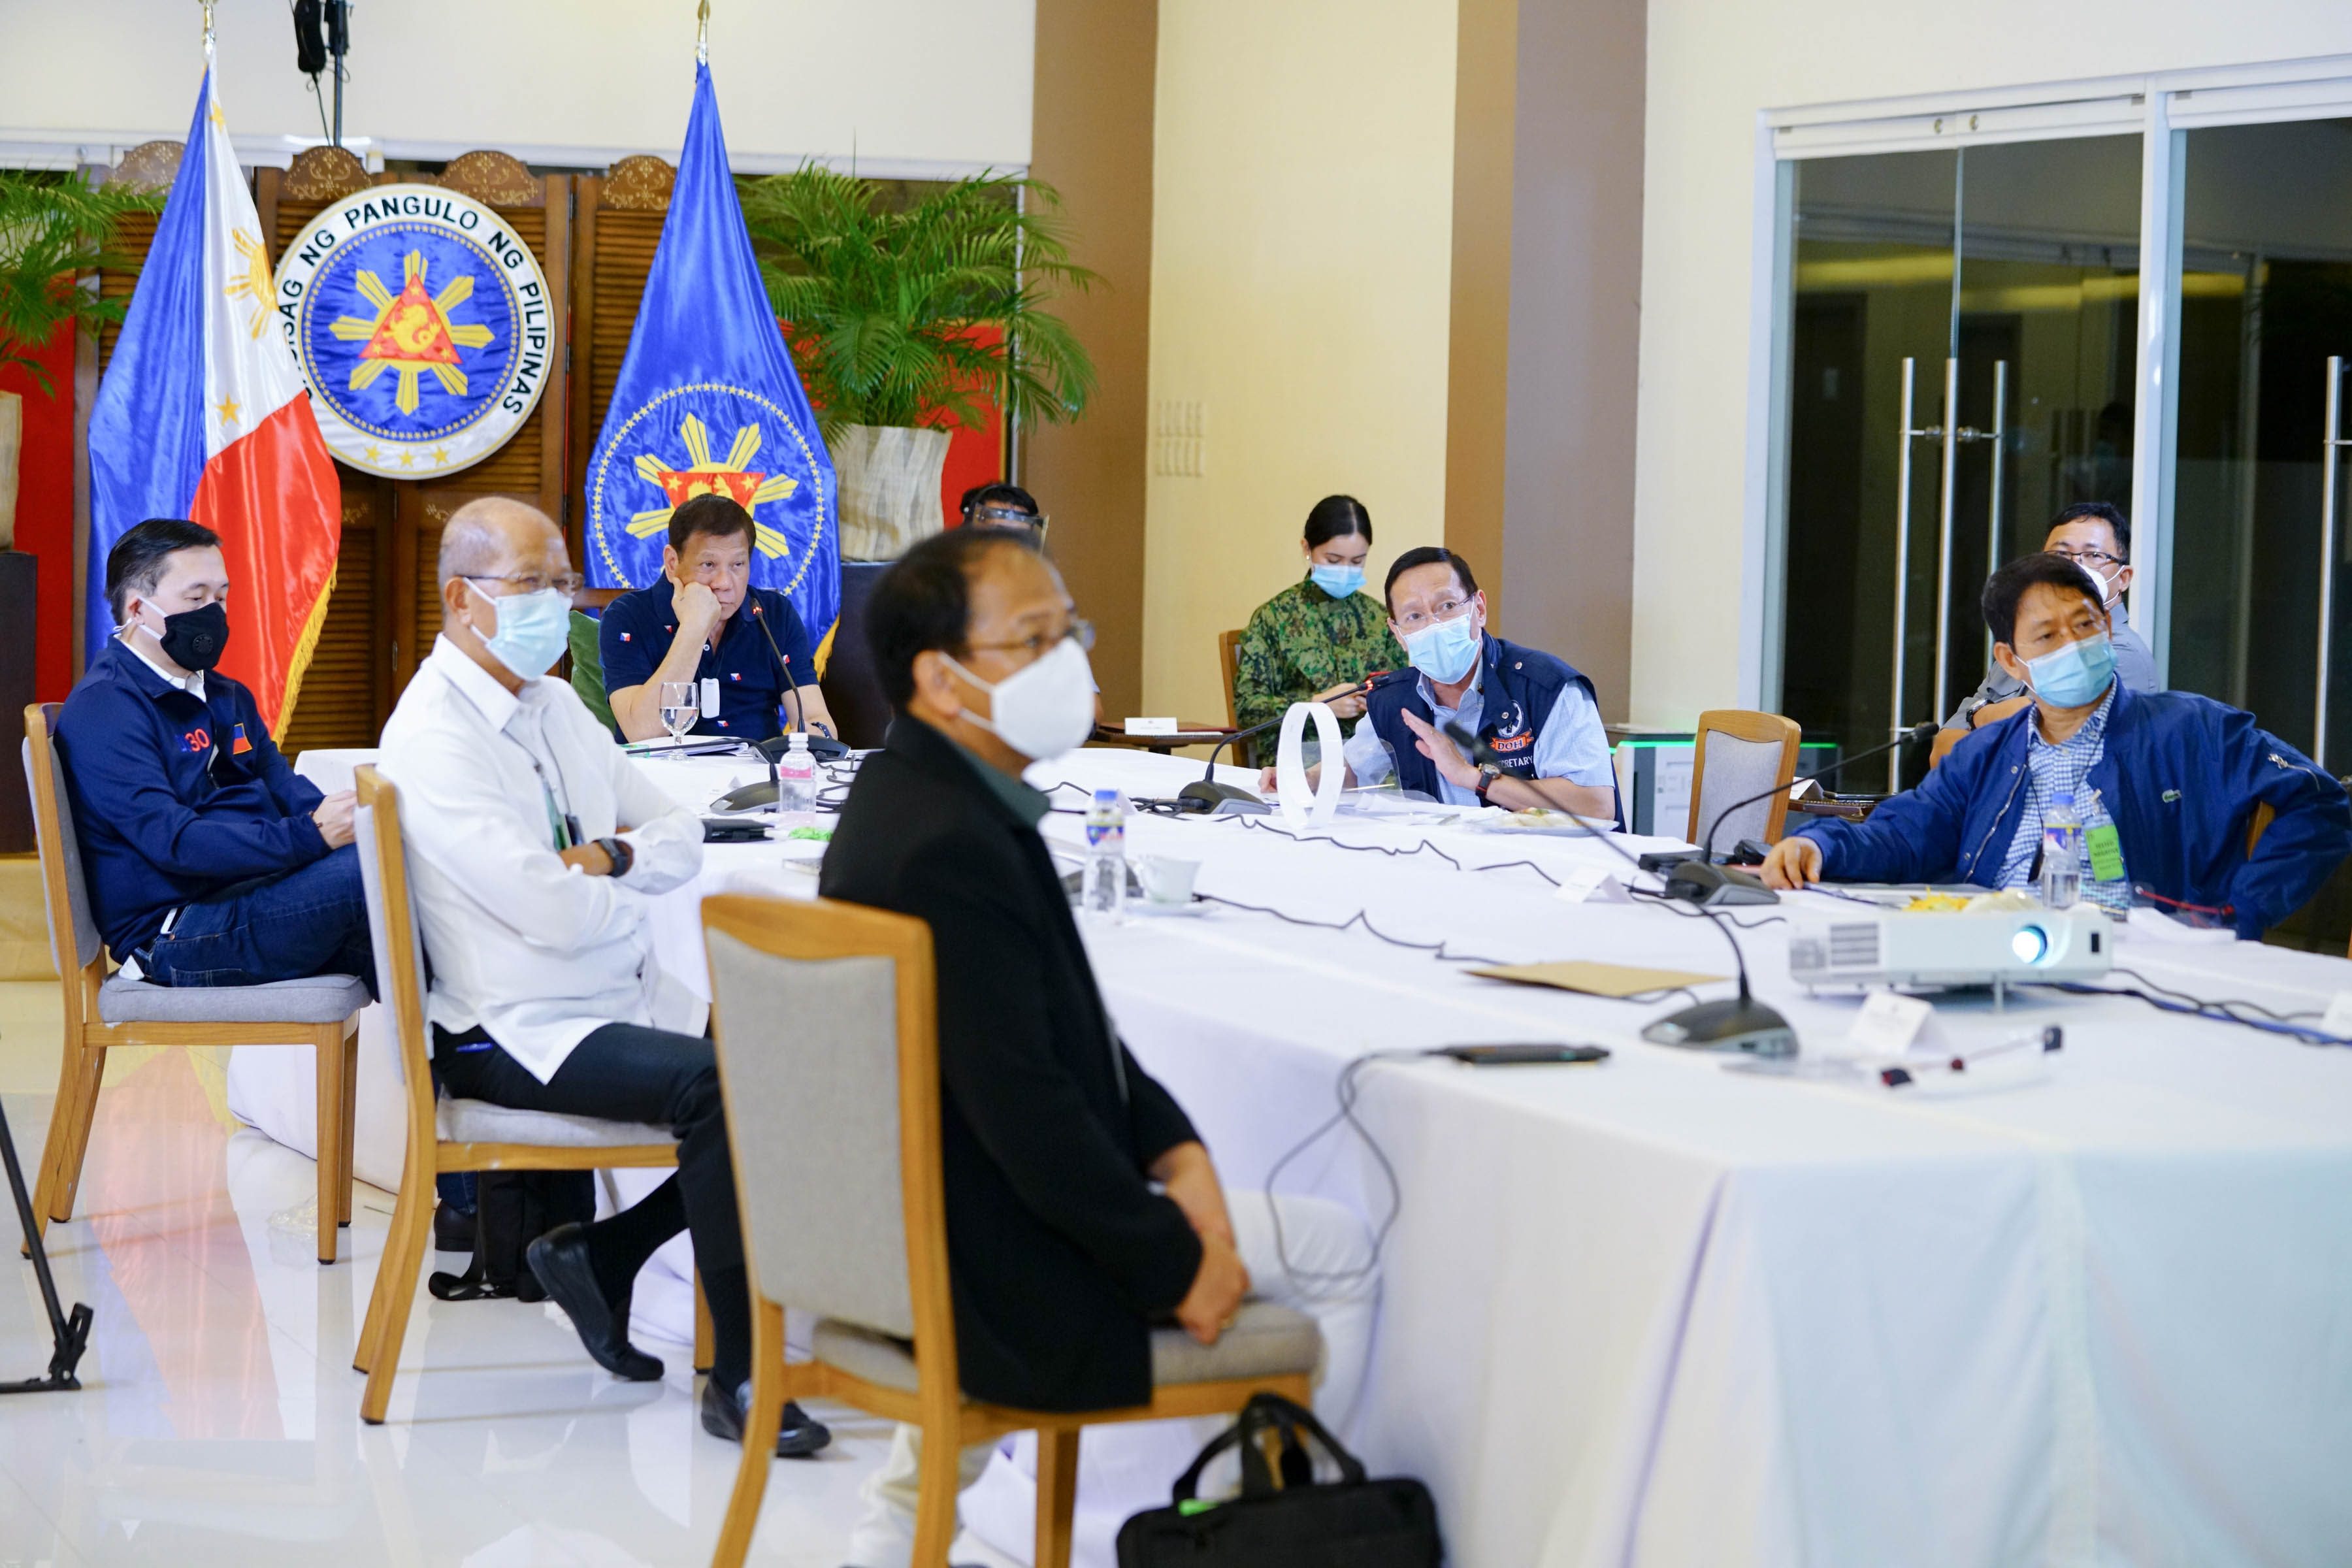 TASK FORCE. President Rodrigo Duterte holds a meeting with members of the Inter-Agency Task Force on the Emerging Infectious Diseases in Davao City on June 4, 2020. Malacañang photo  